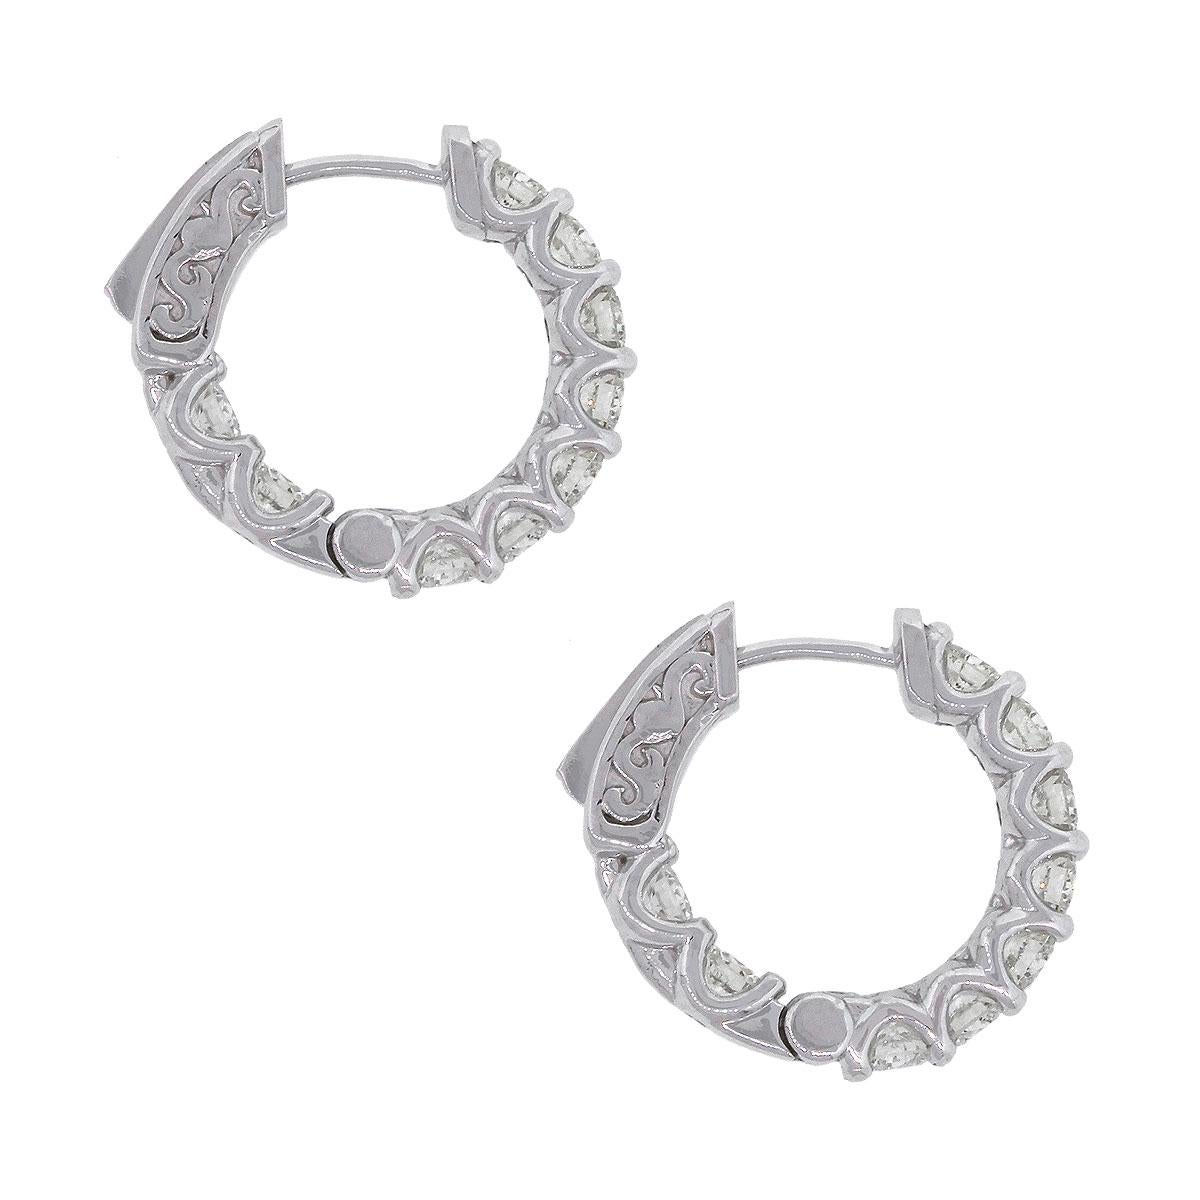 Material: 14k White Gold
Style: Diamond Inside Out Hoops
Diamond Details: 18 stones, Approximately 0.74ctw of round brilliant diamonds. Diamonds are G/H in color and SI in clarity.
Earring Measurements: 0.75″ x 0.11″ x 0.70″
Total Weight: 6g